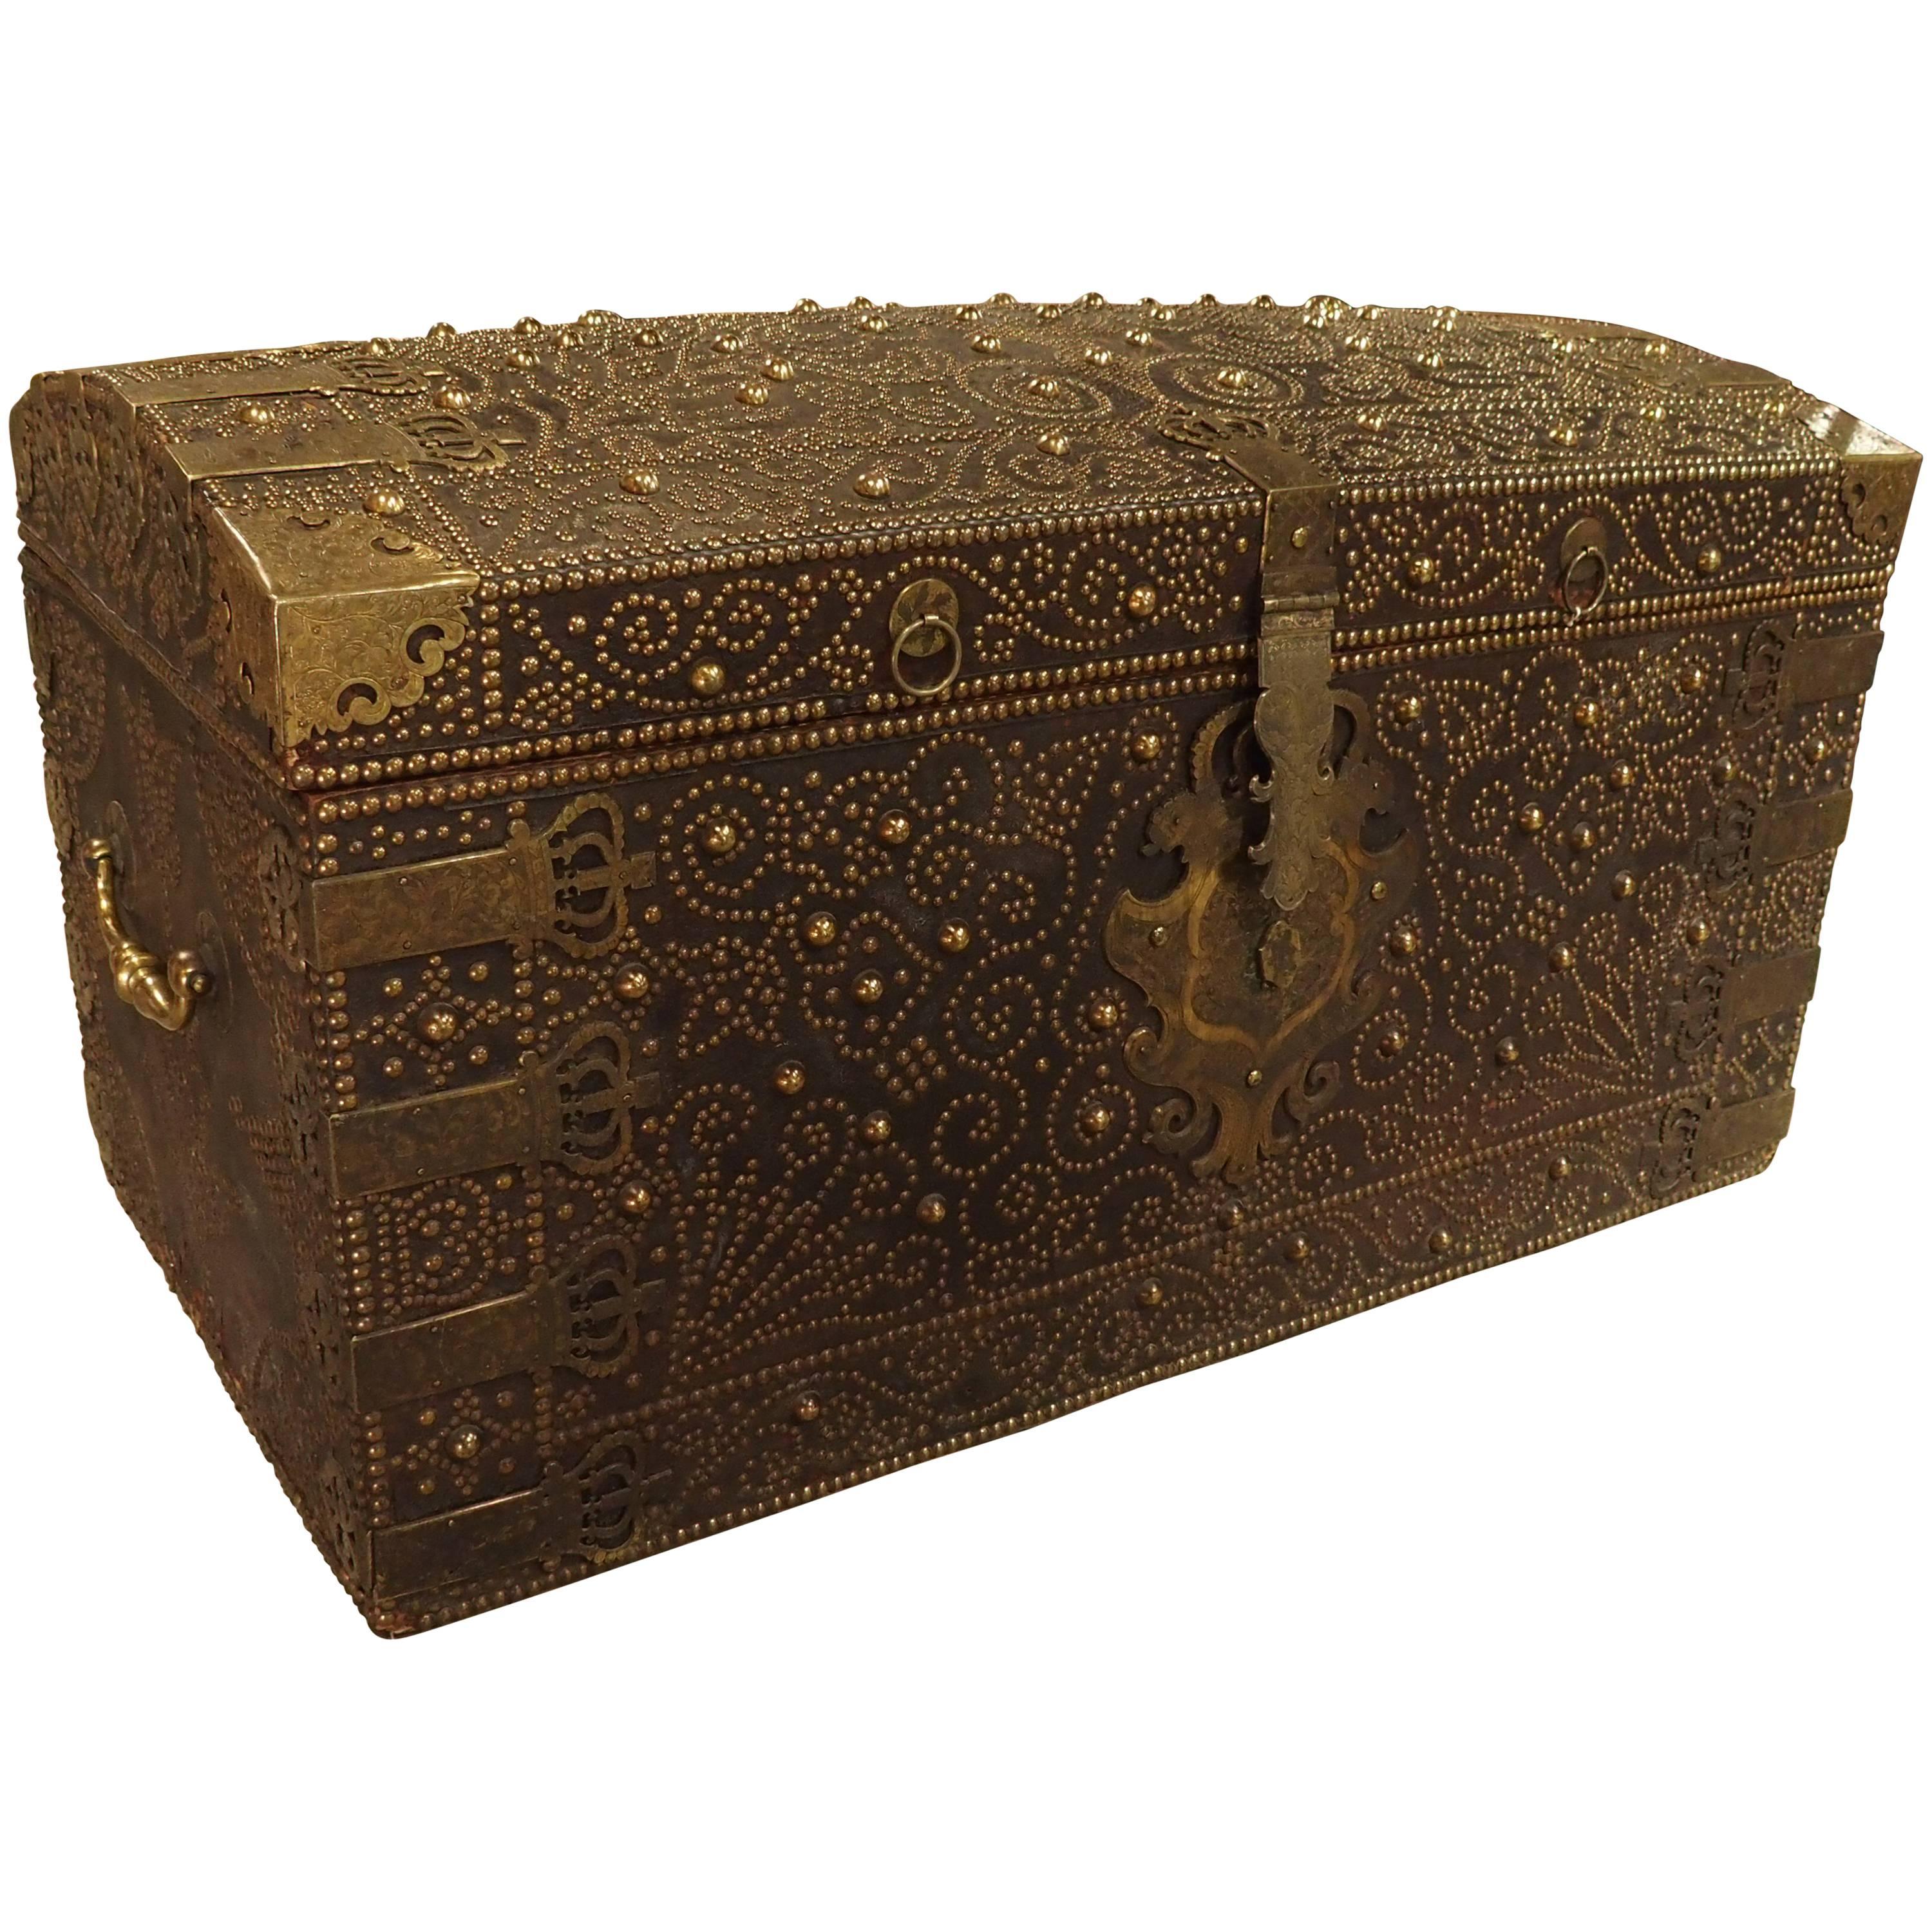 Magnificent Antique Leather Chest from England, Late 1700s